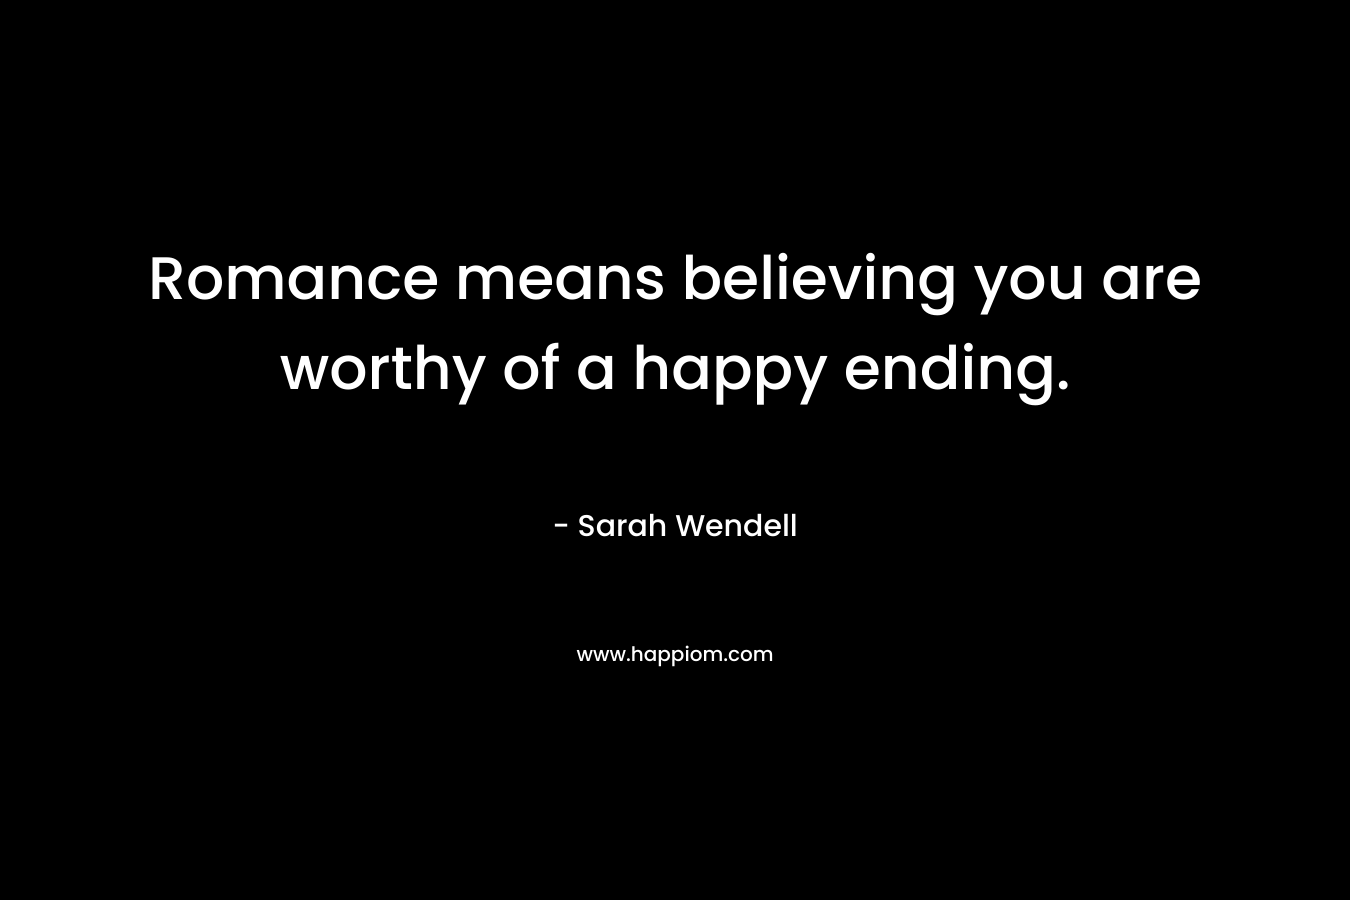 Romance means believing you are worthy of a happy ending. – Sarah Wendell